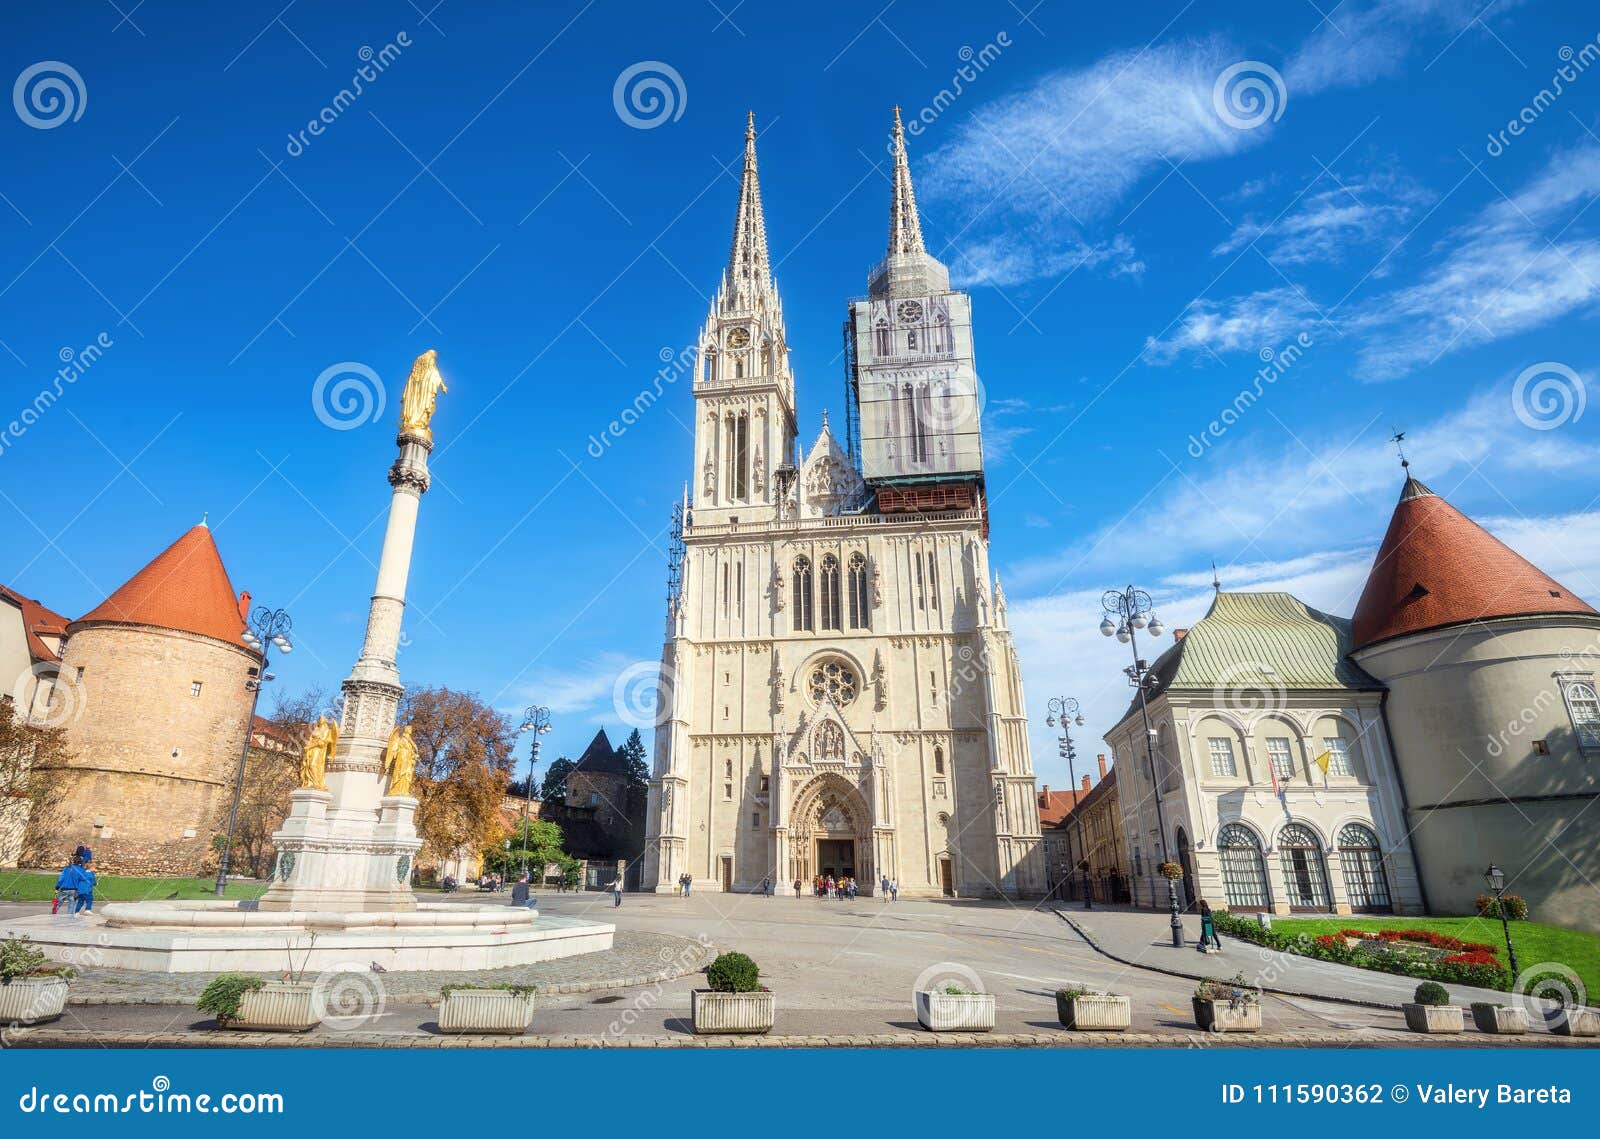 cathedral and blessed virgin mary monument in zagreb. croatia